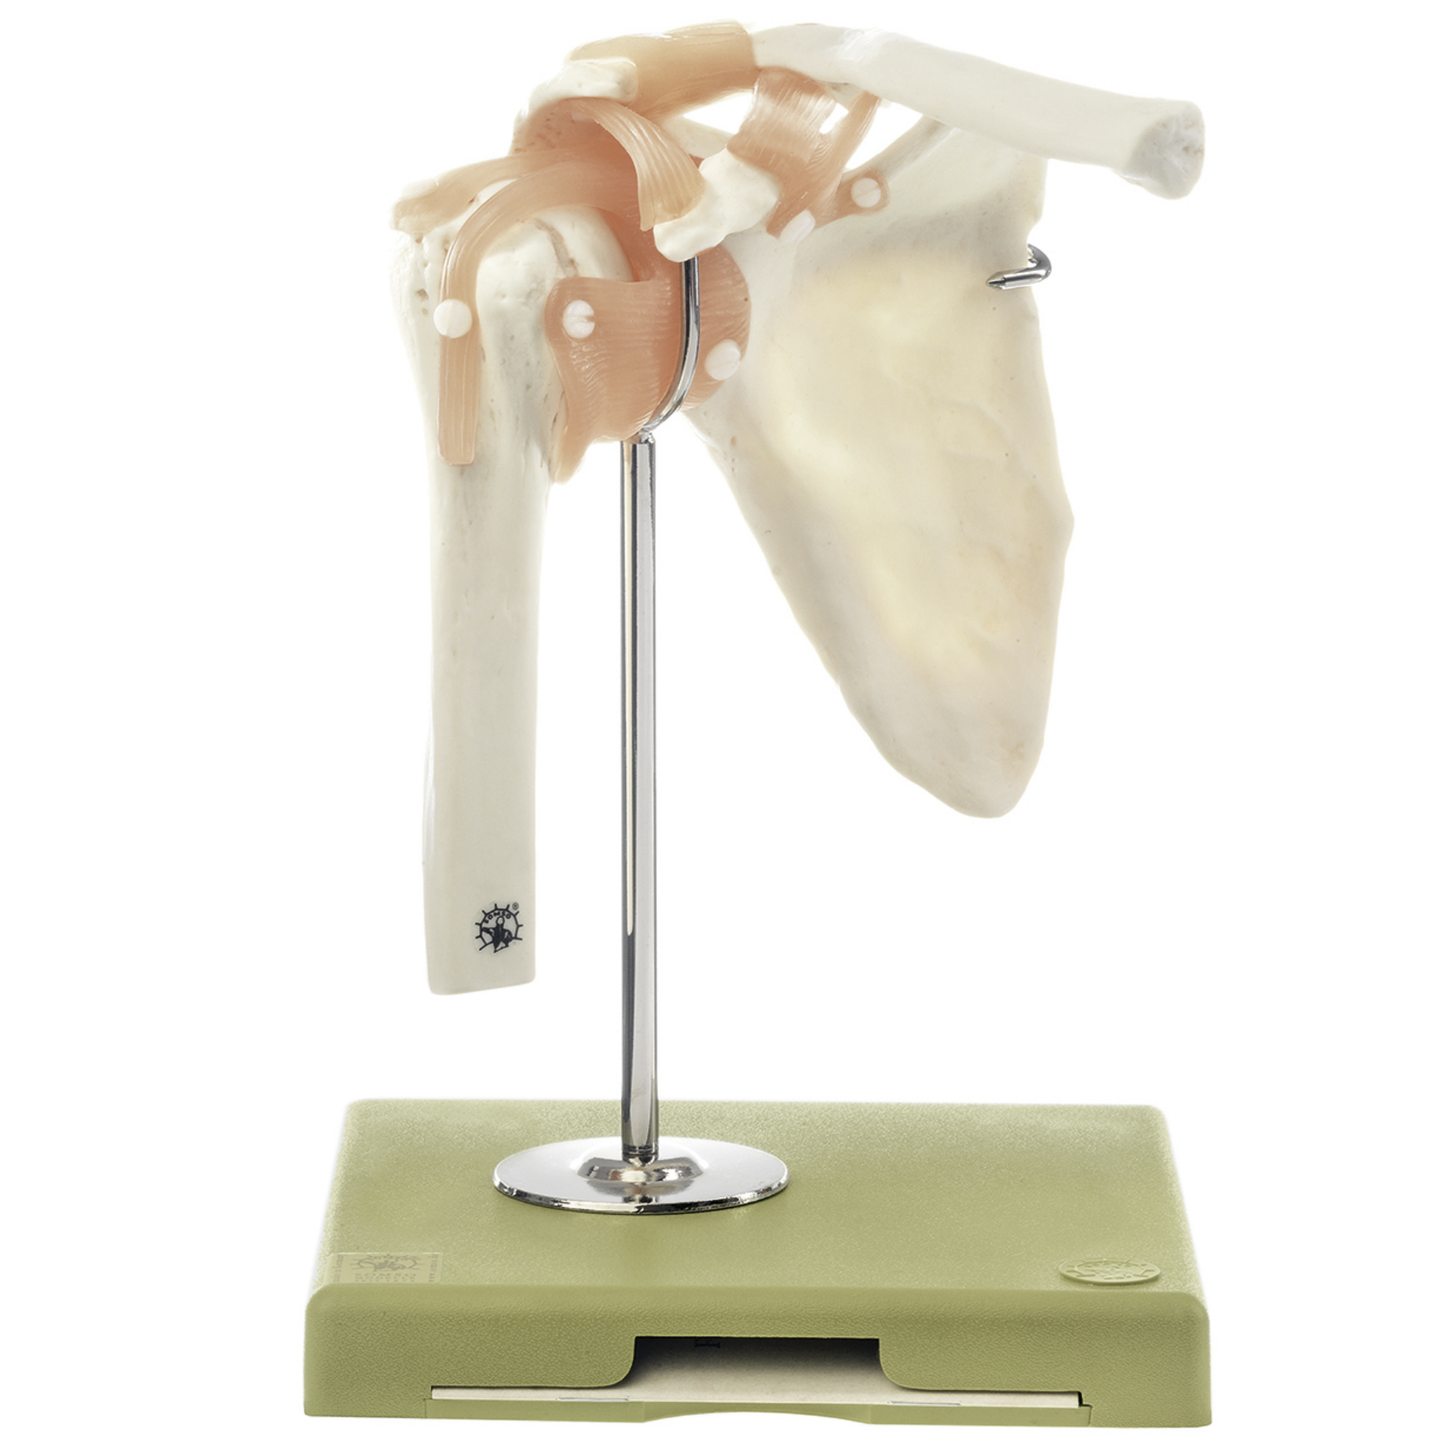 Flexible shoulder model with ligaments and highly realistic bones